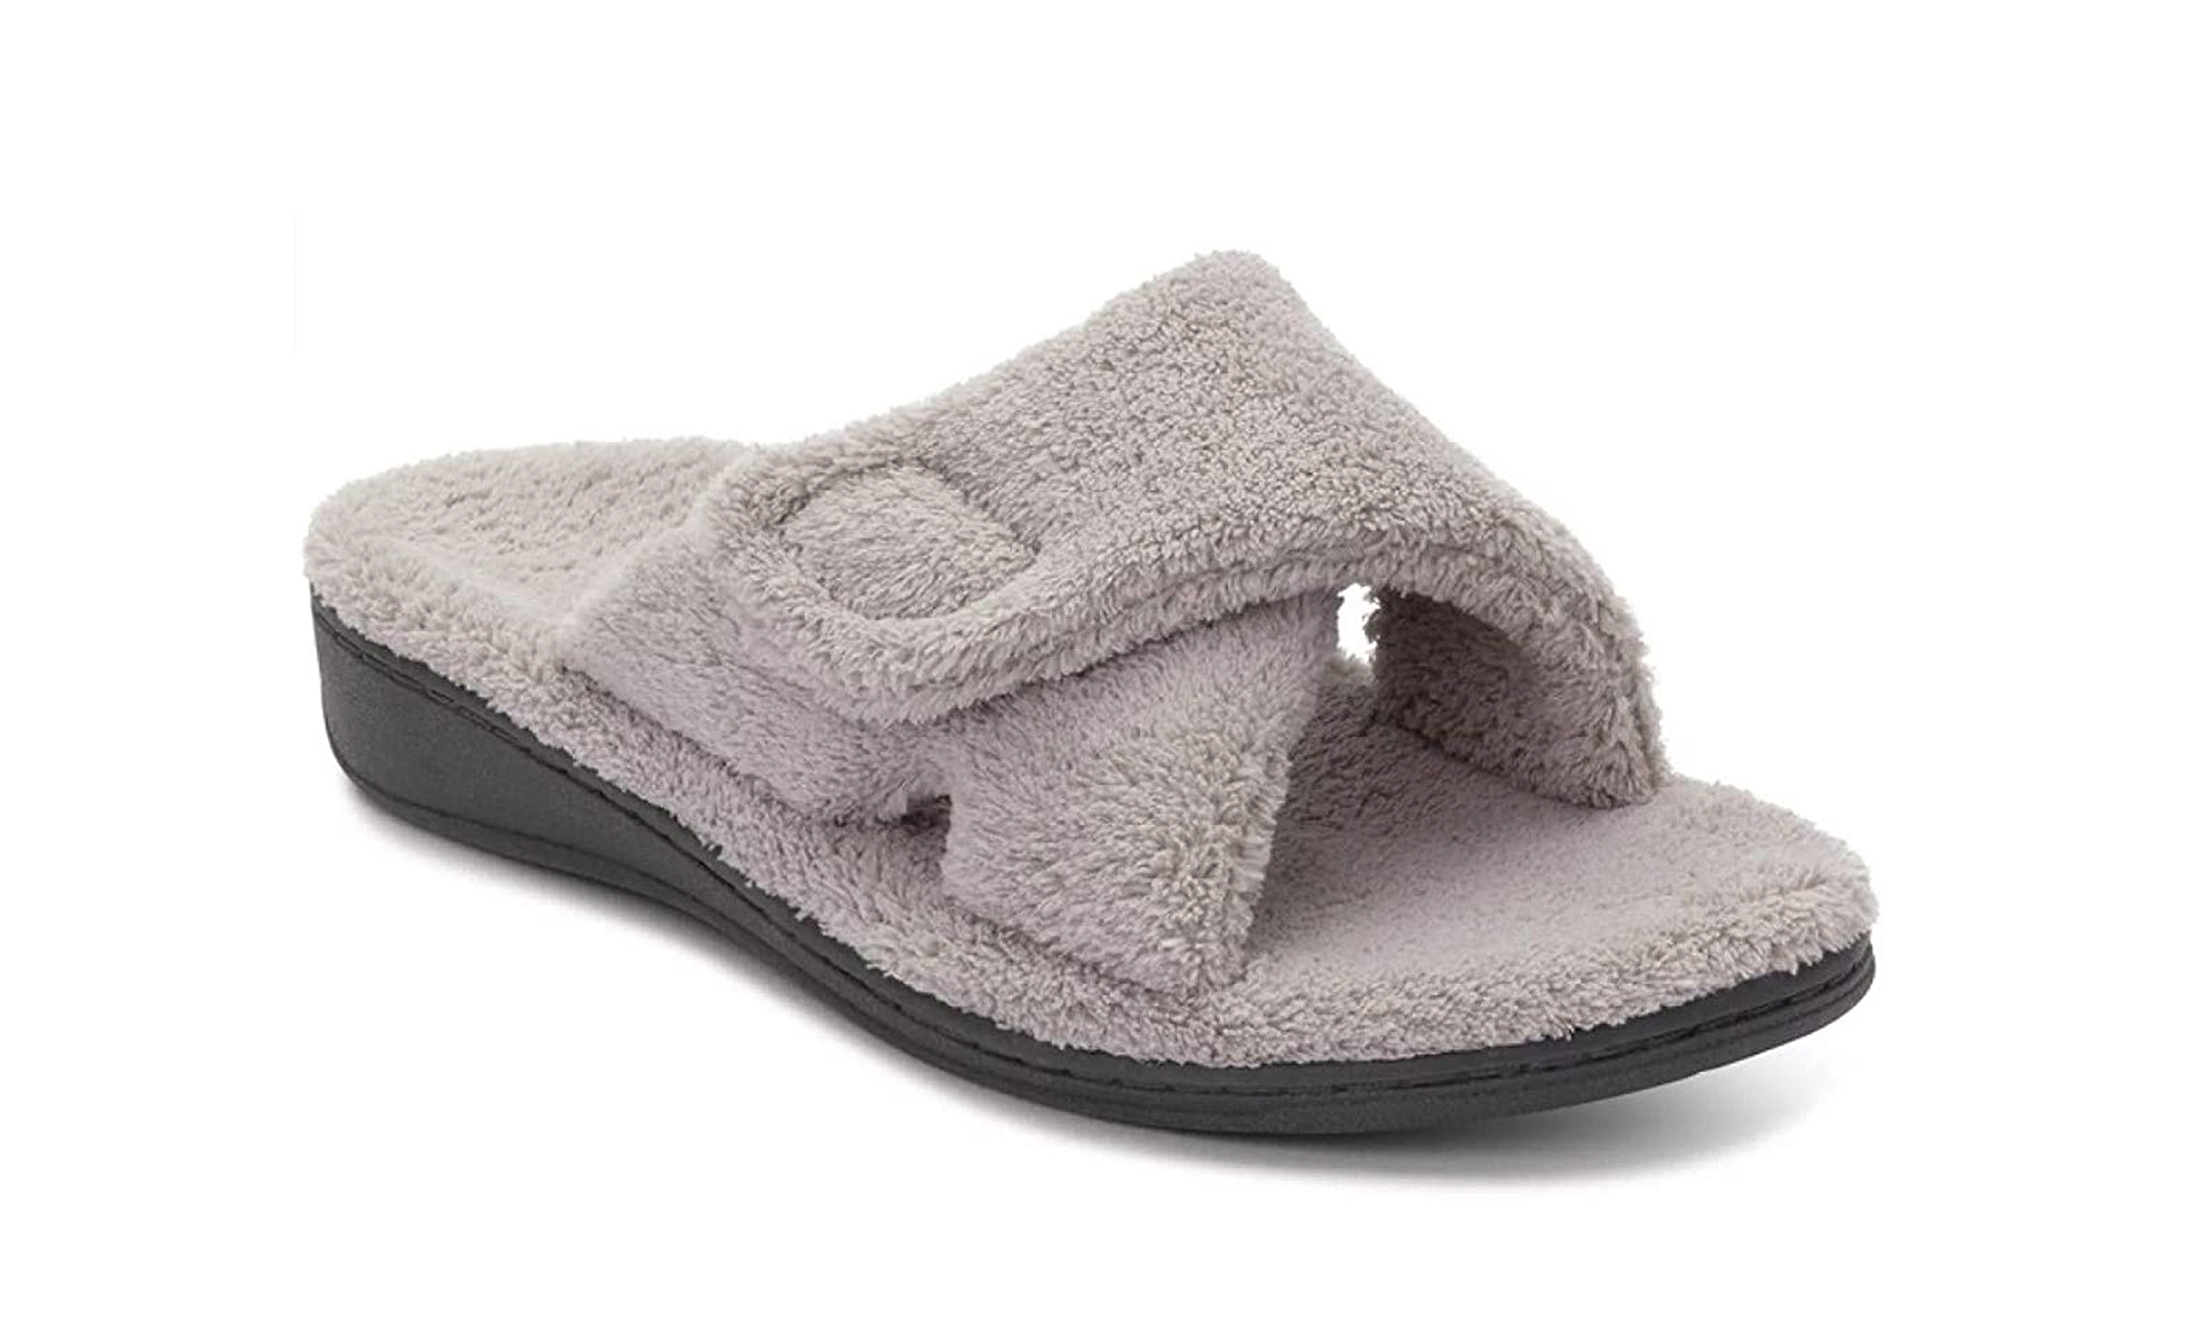 vionic relax slippers on sale